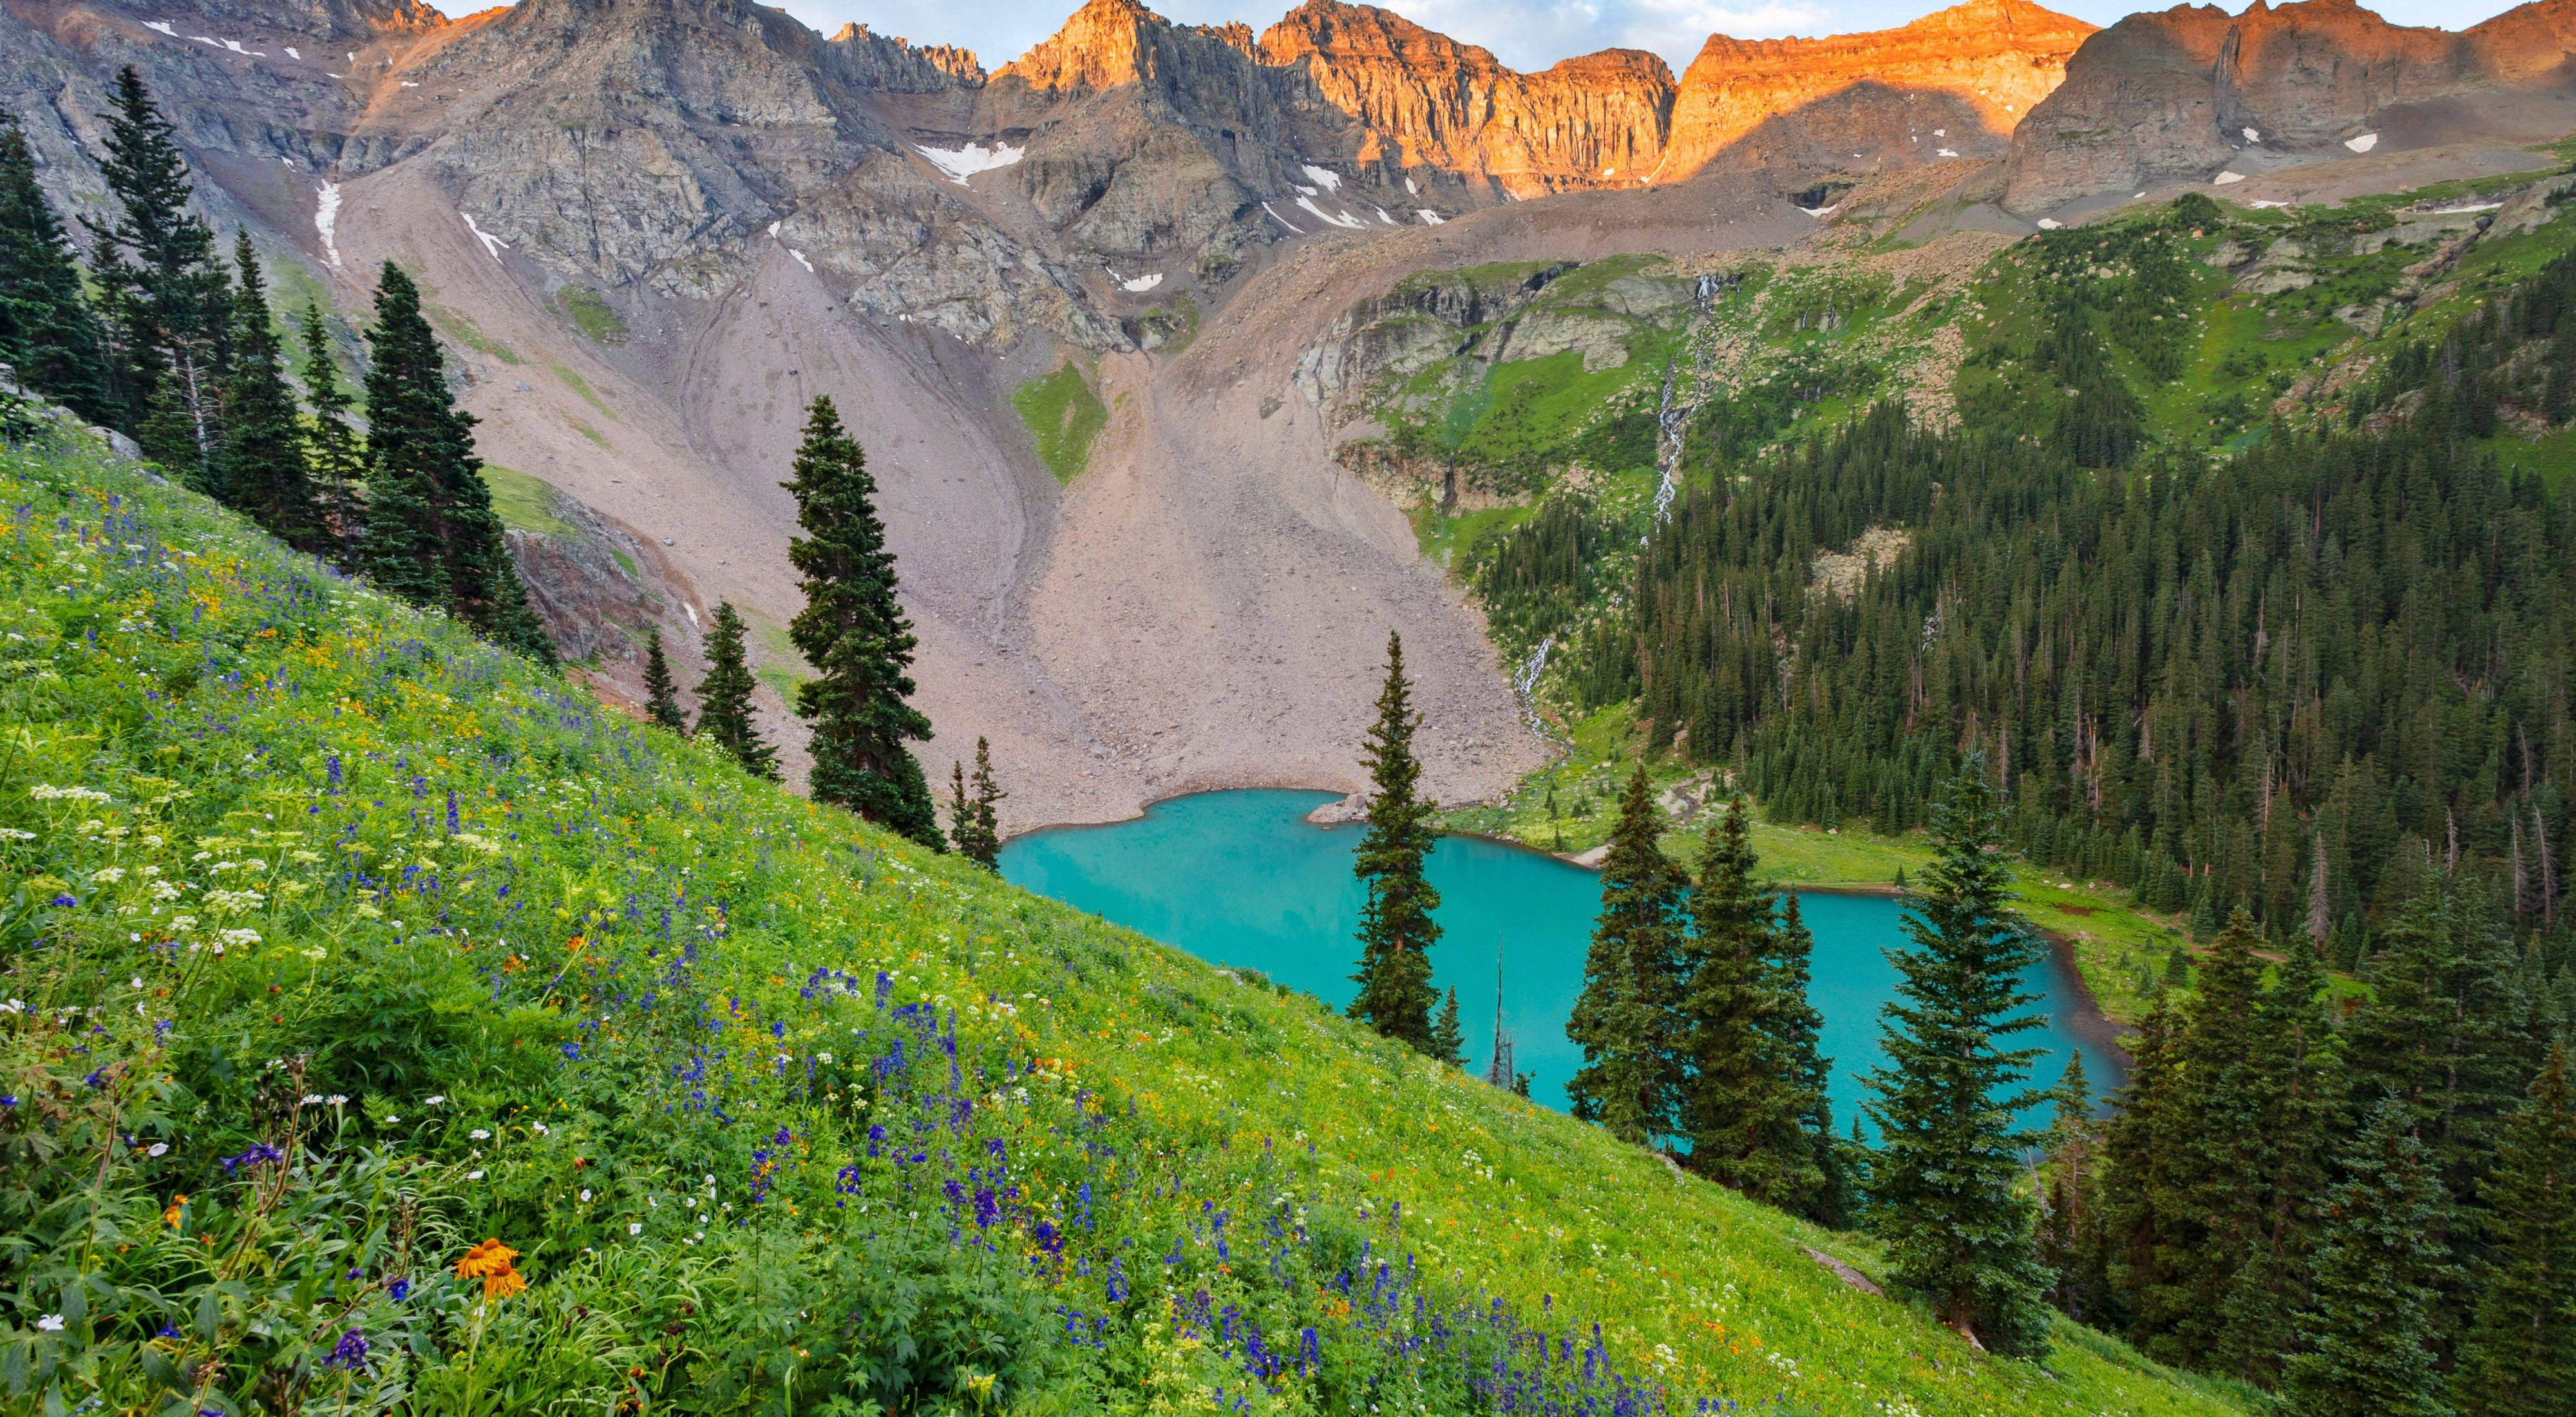 A turquoise lake sits beneath mountains and green grass hills.